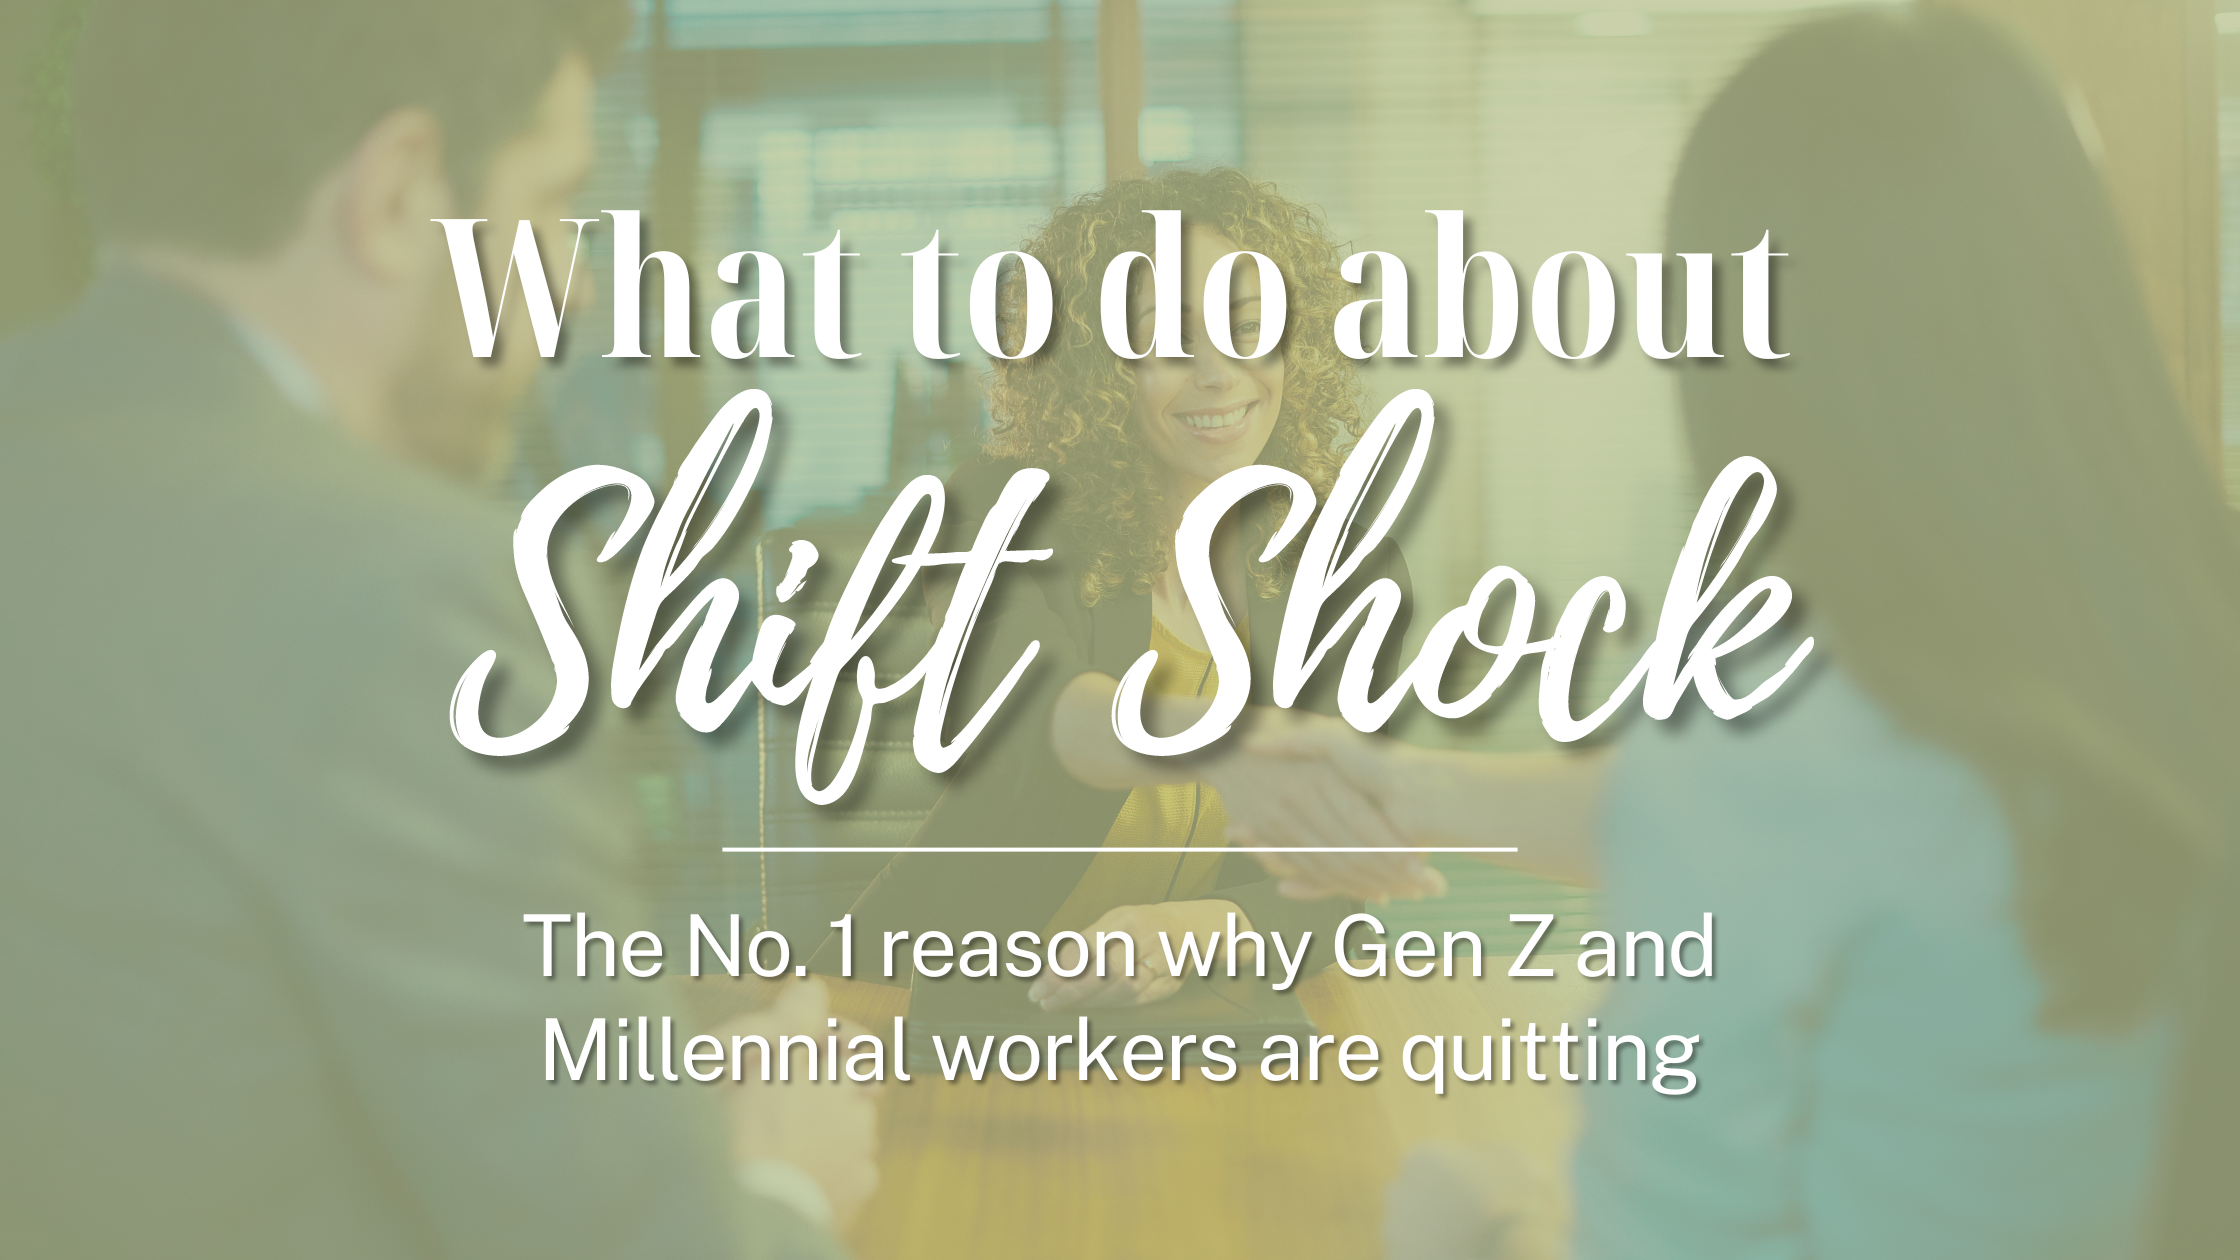 What to do about ‘shift shock’ – the No. 1 reason why Gen Z and Millennial workers are quitting